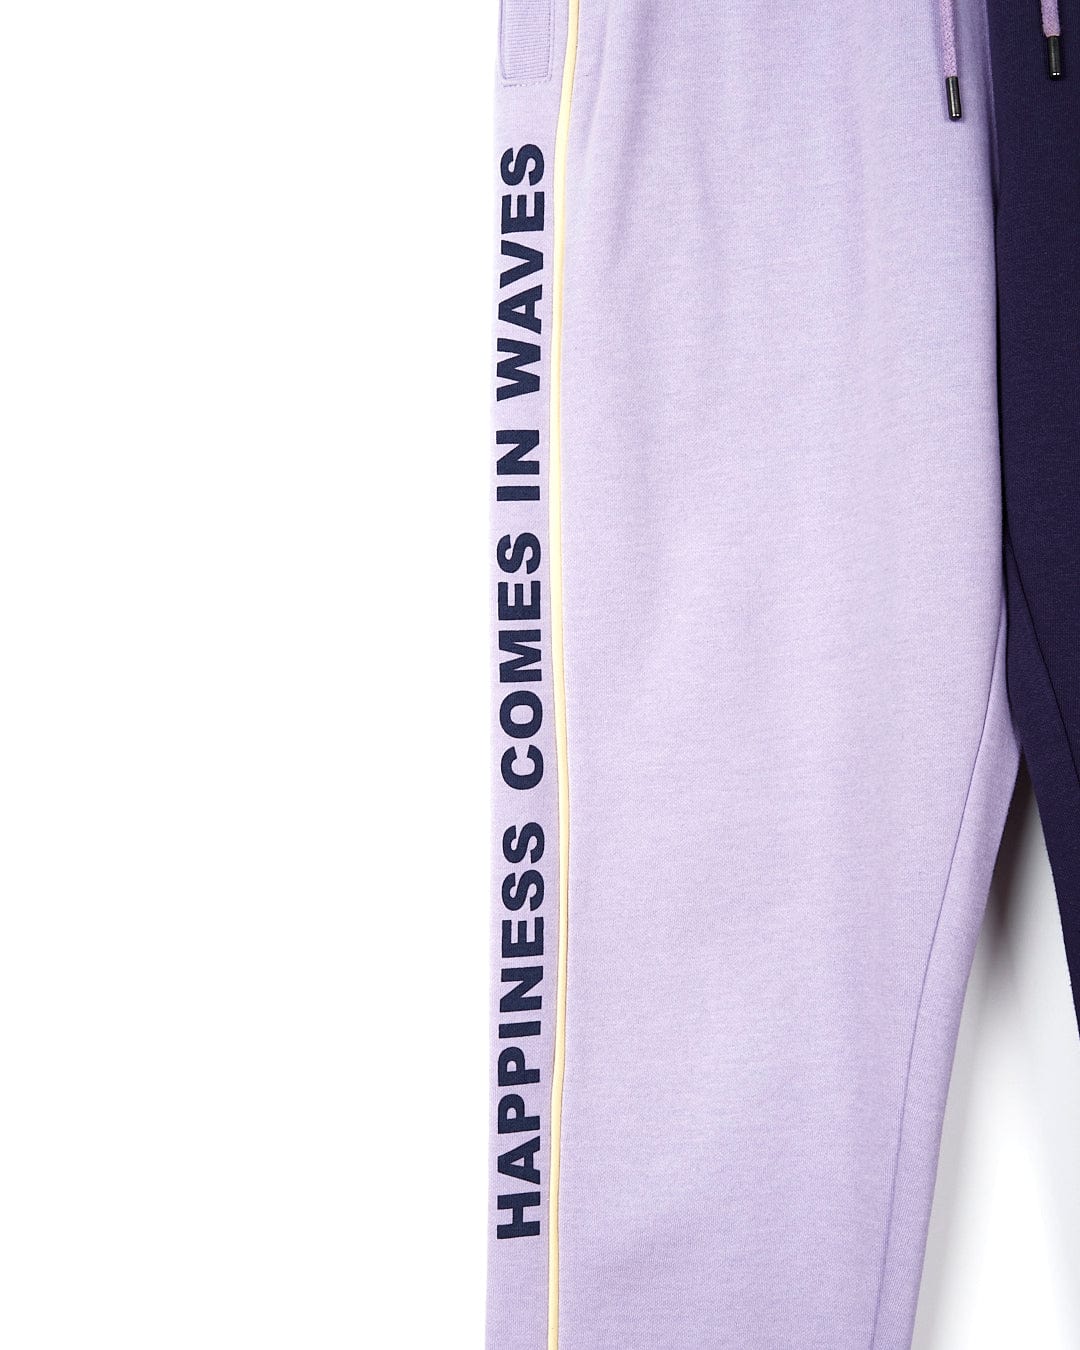 A pair of Betty - Womens Jogger - Light Purple sweatpants from Saltrock with the words 'happiness waves' on them.